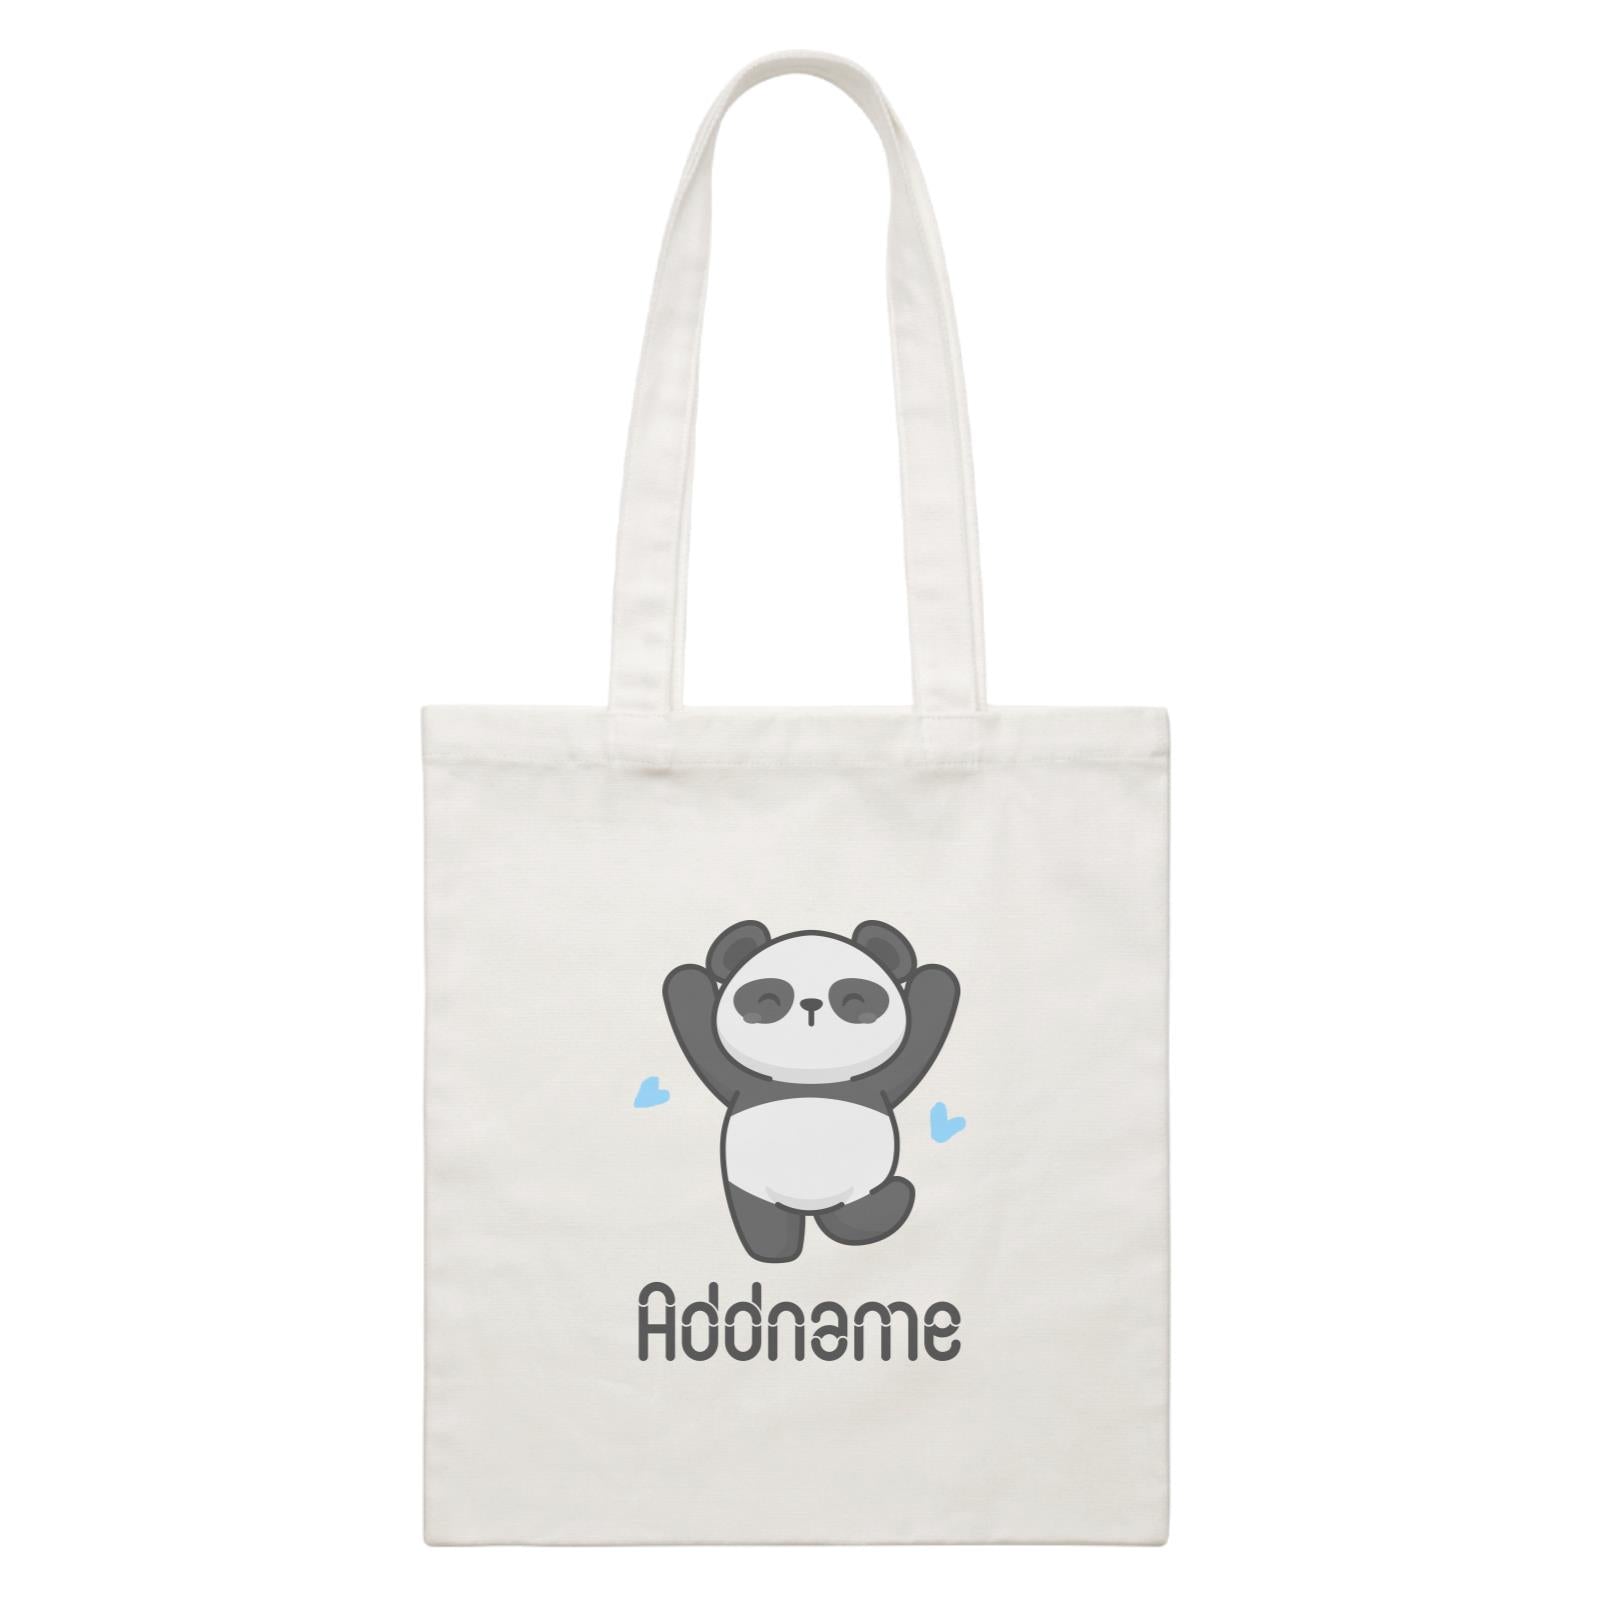 Cute Hand Drawn Style Panda Jumps with Joy Addname White Canvas Bag